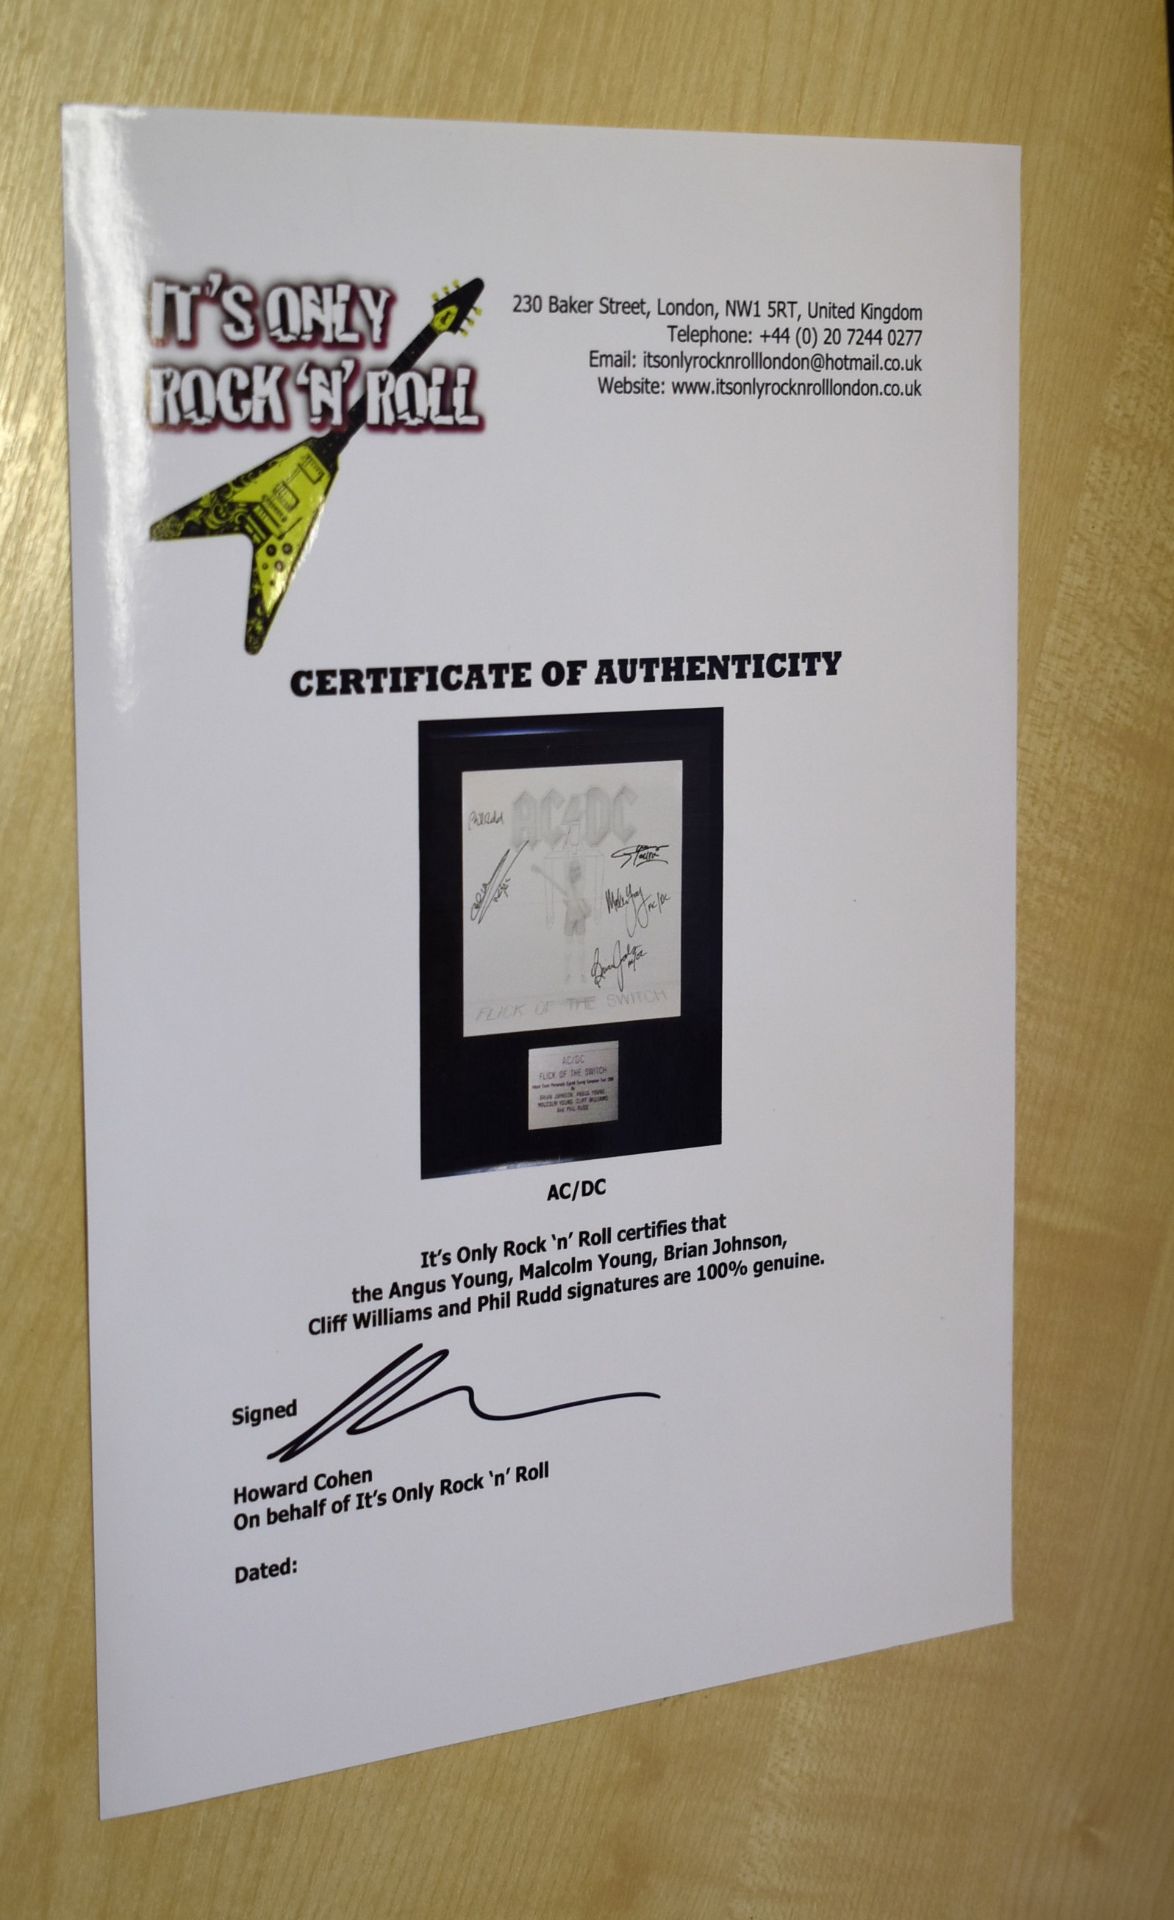 1 x Authentic AC/DC Autographs With COA - Flick of The Switch Album Cover Signed By Dave Evans, - Image 12 of 14